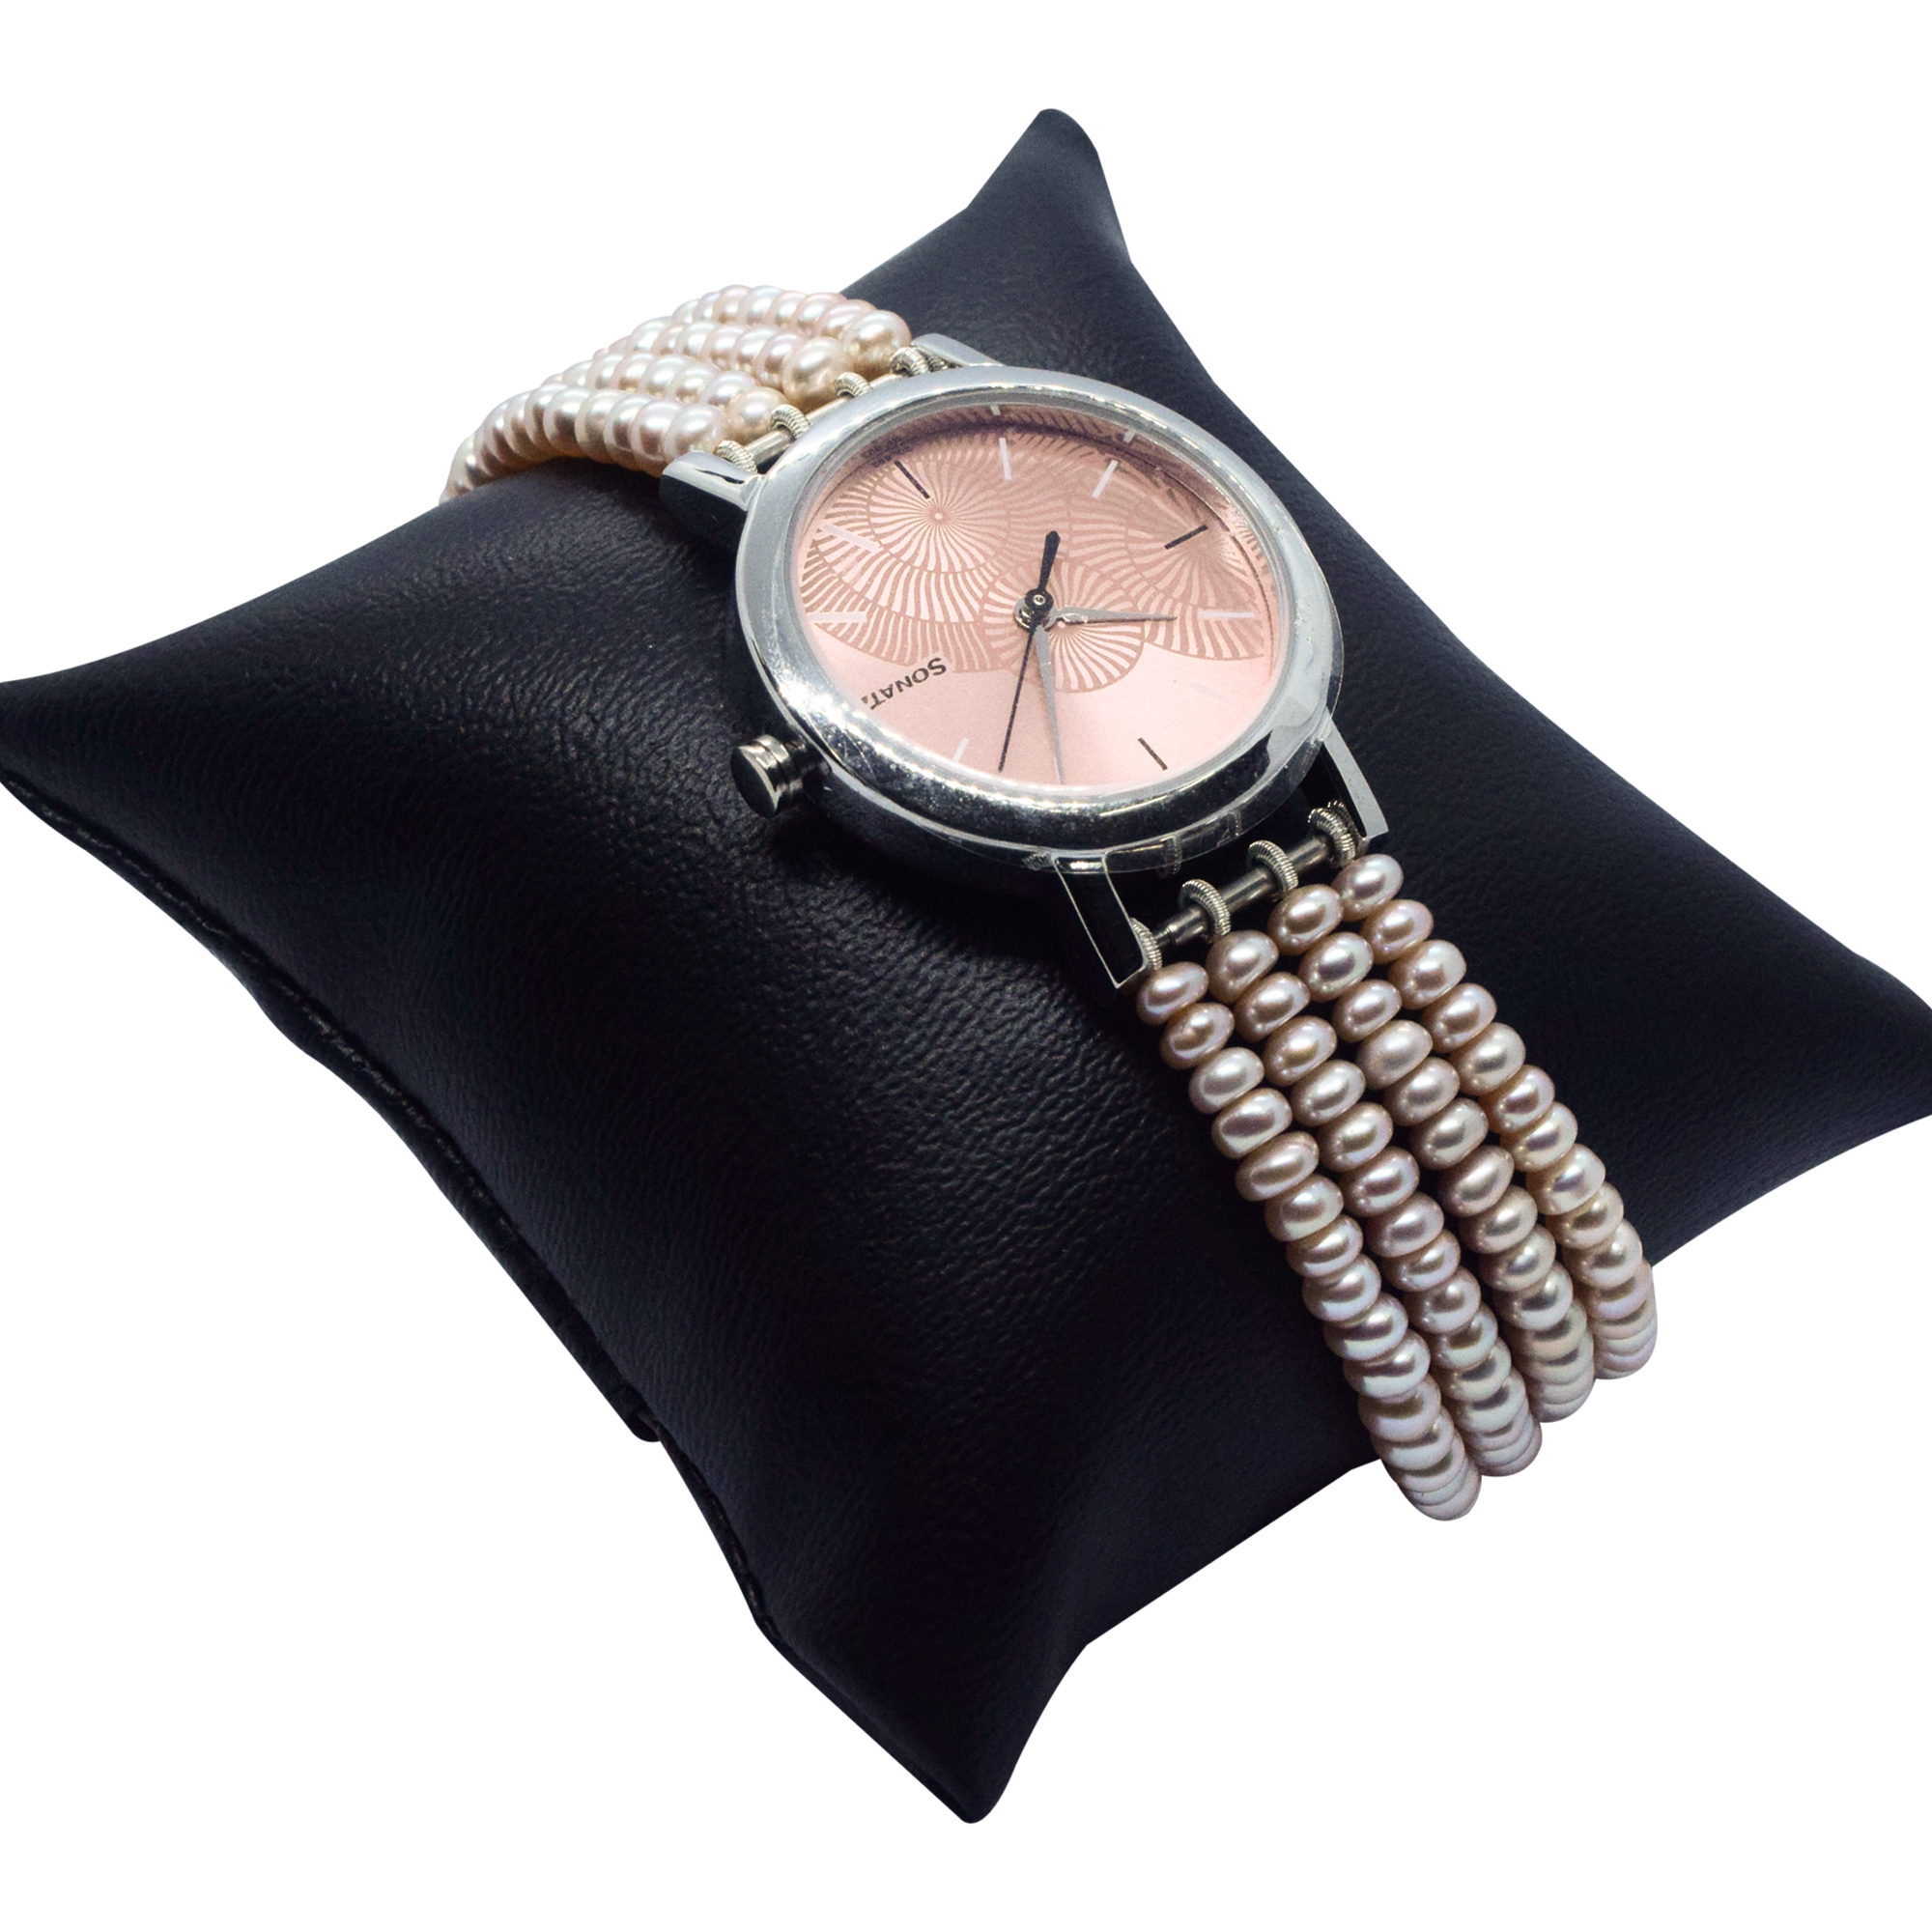 Evergreen Mesh Pattern White Pearls Watch With Sonata Dial - Pure Pearls